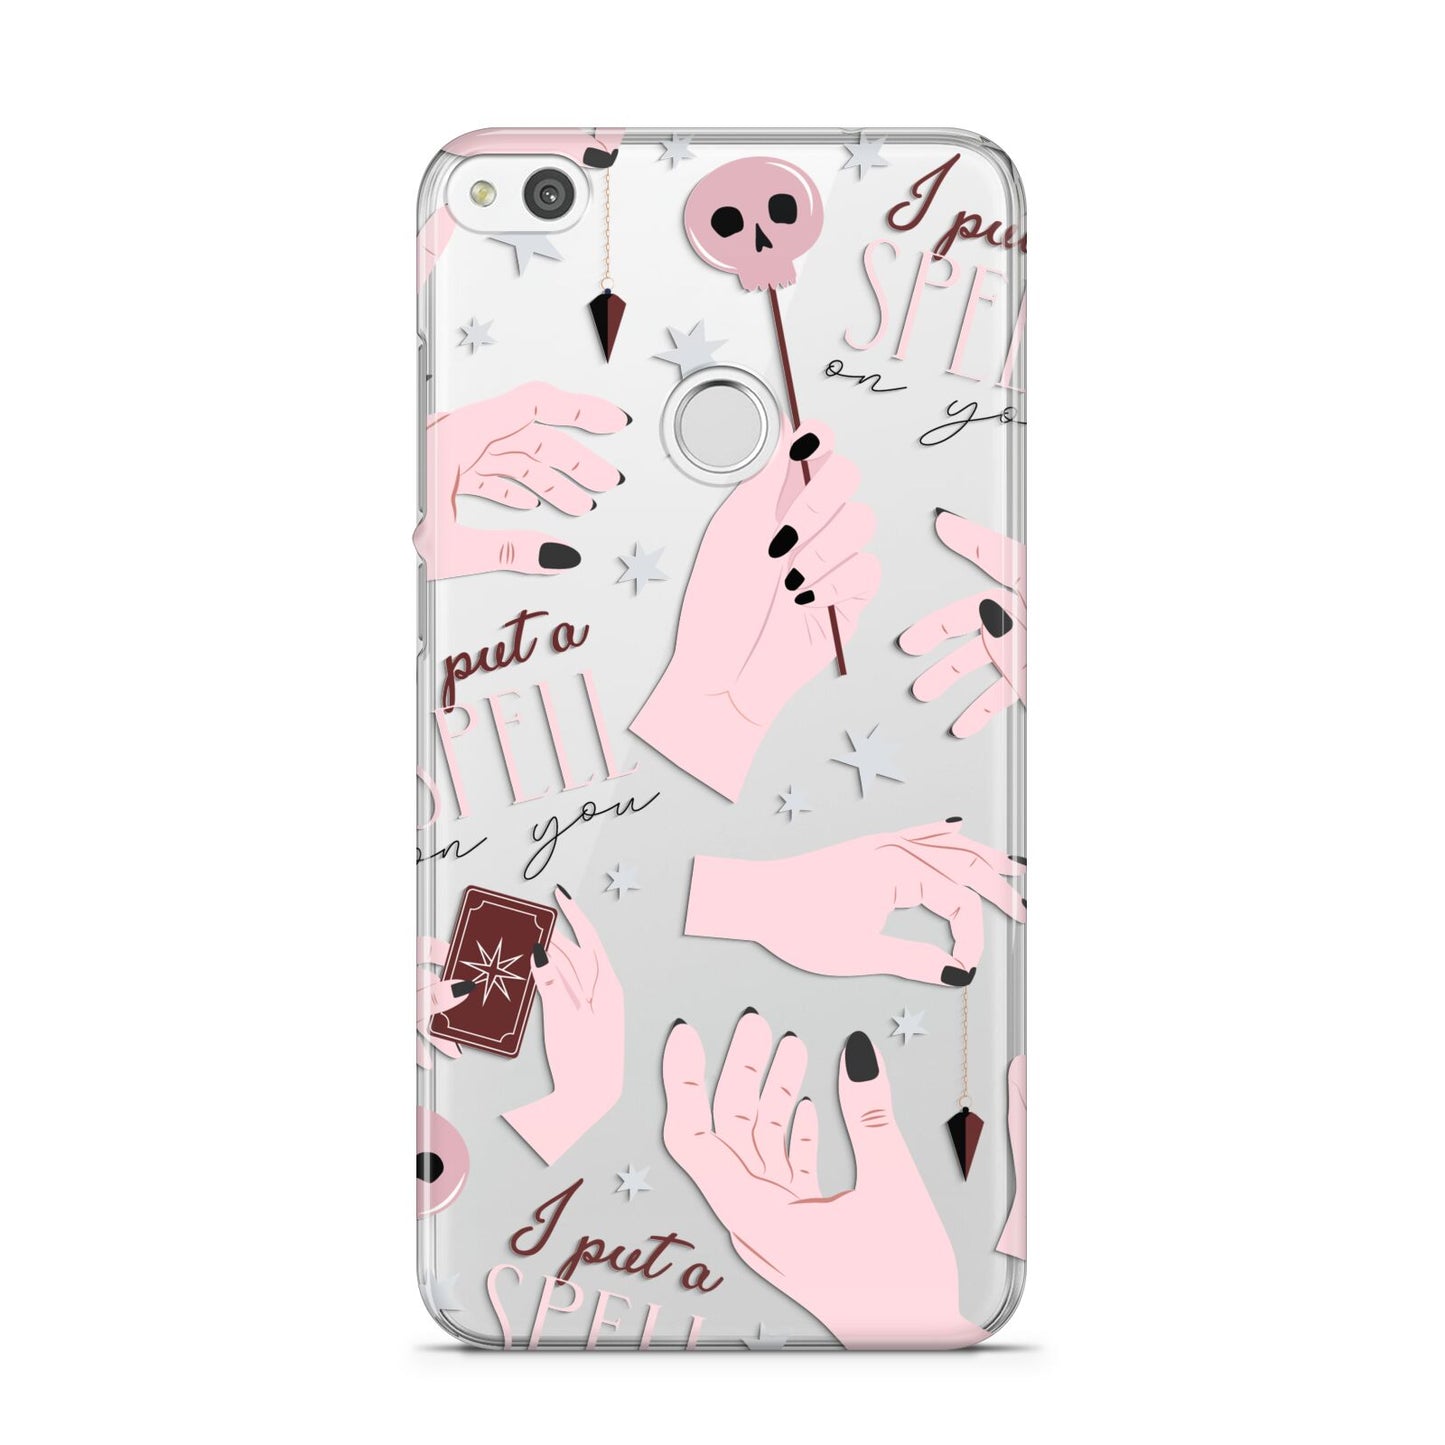 Witches Hands and Tarot Cards Huawei P8 Lite Case